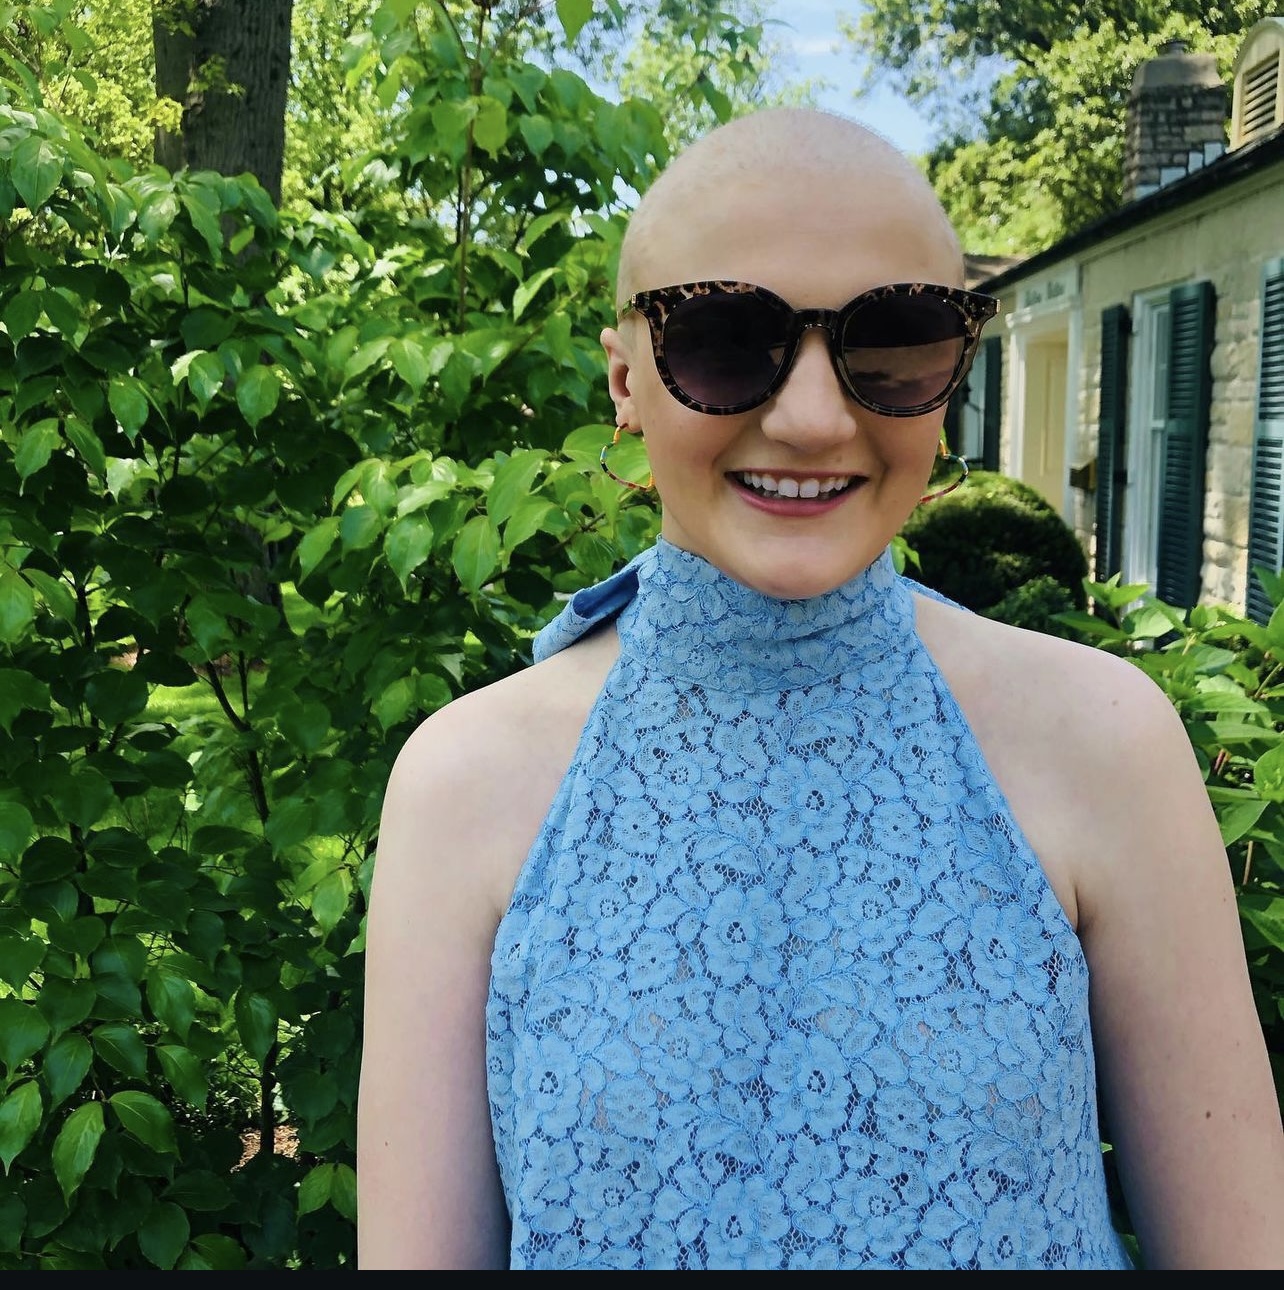 Bald white young lady wearing sunglasses and a blue top